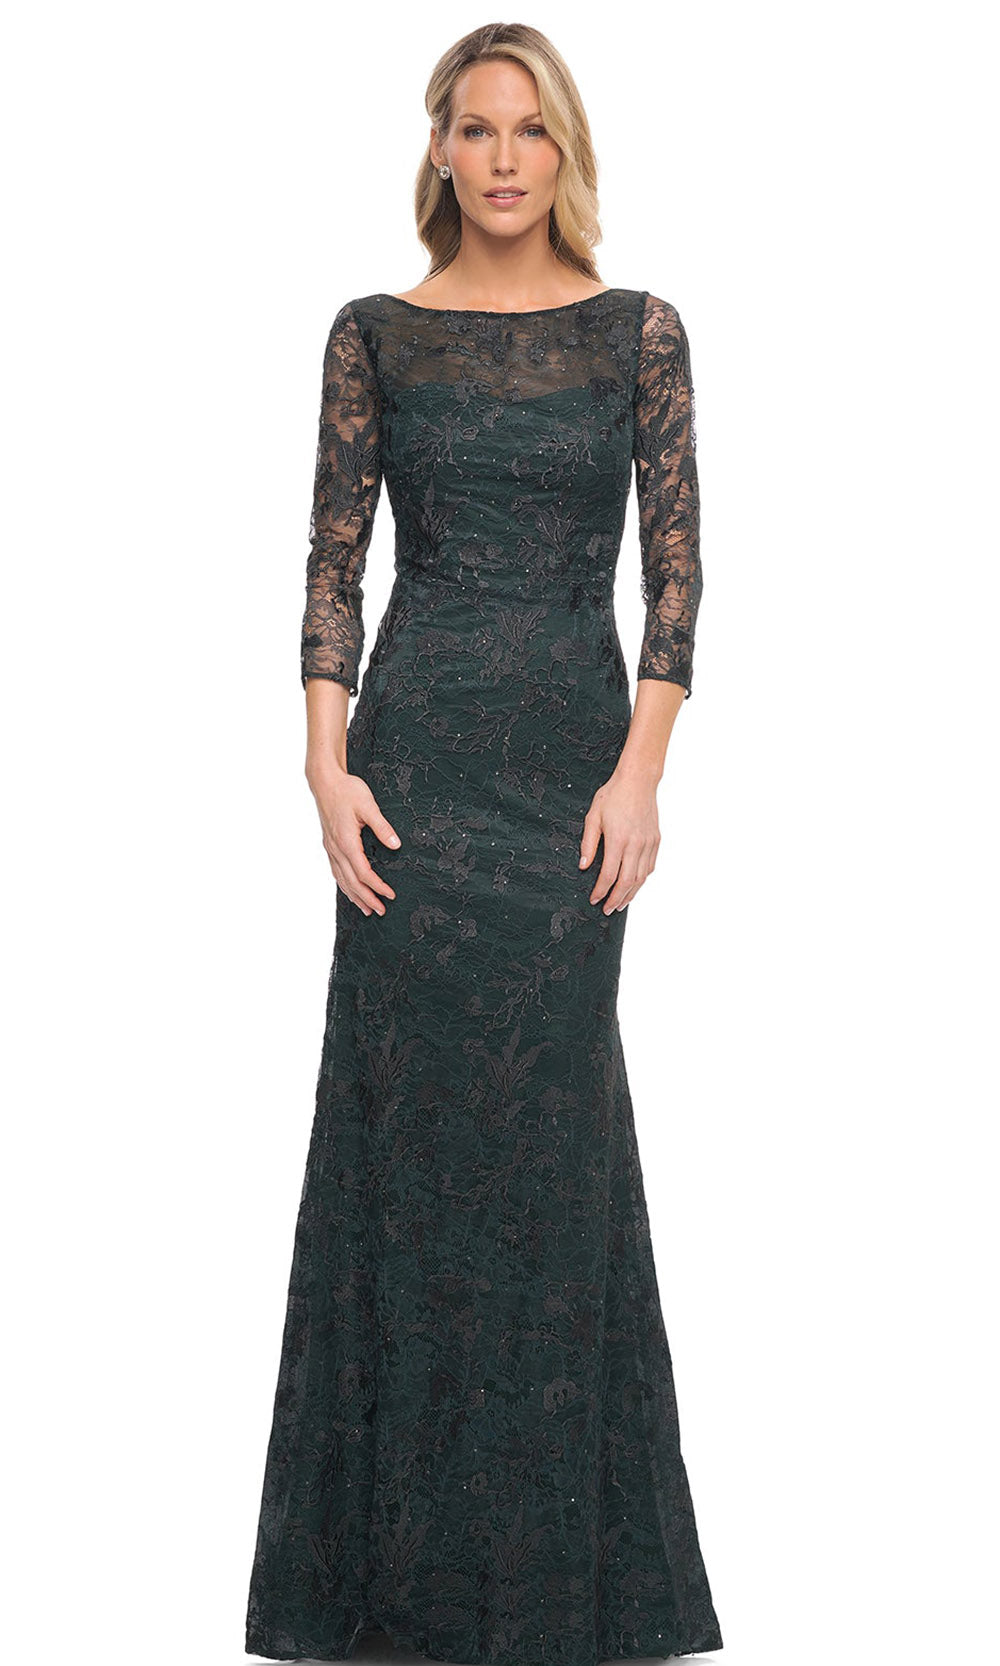 La Femme - 30317 Embroidered Sheer Lace Sheath Dress In Green